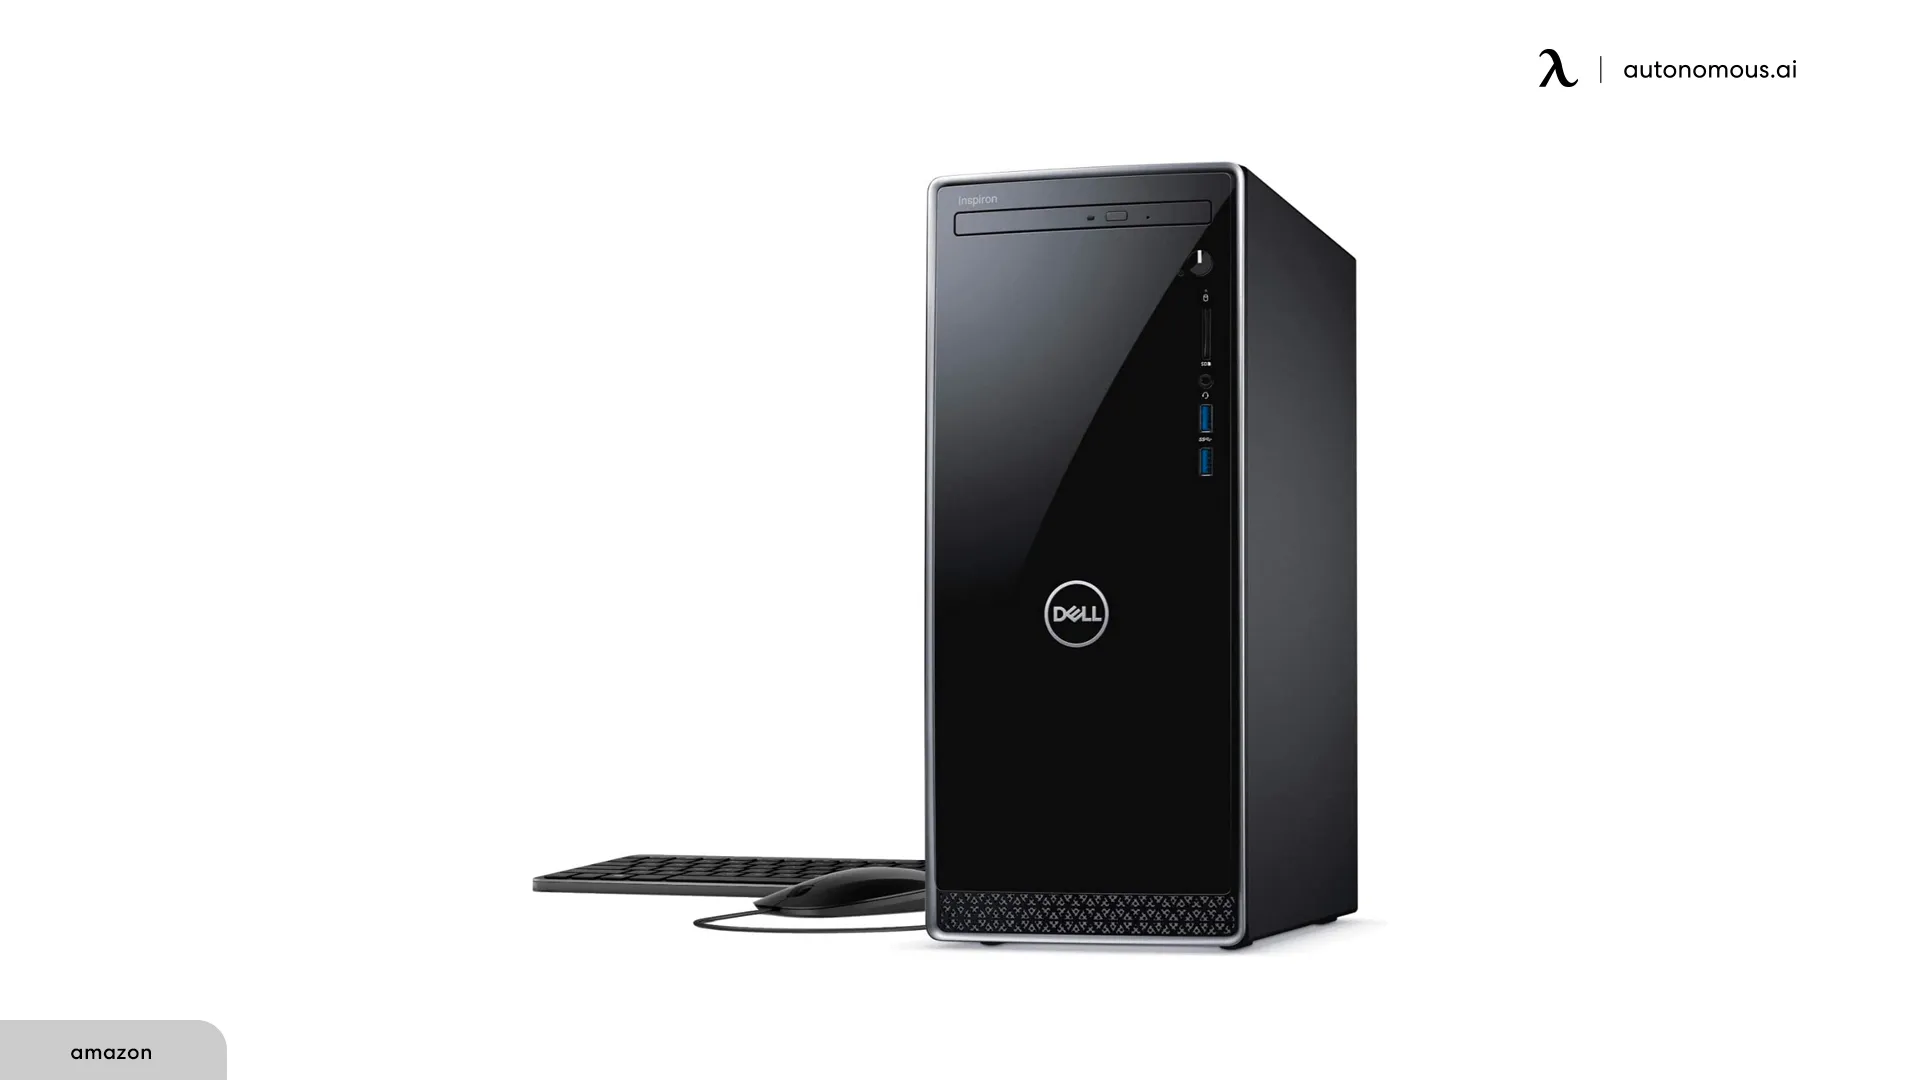 Dell Inspiron 3670 Tower